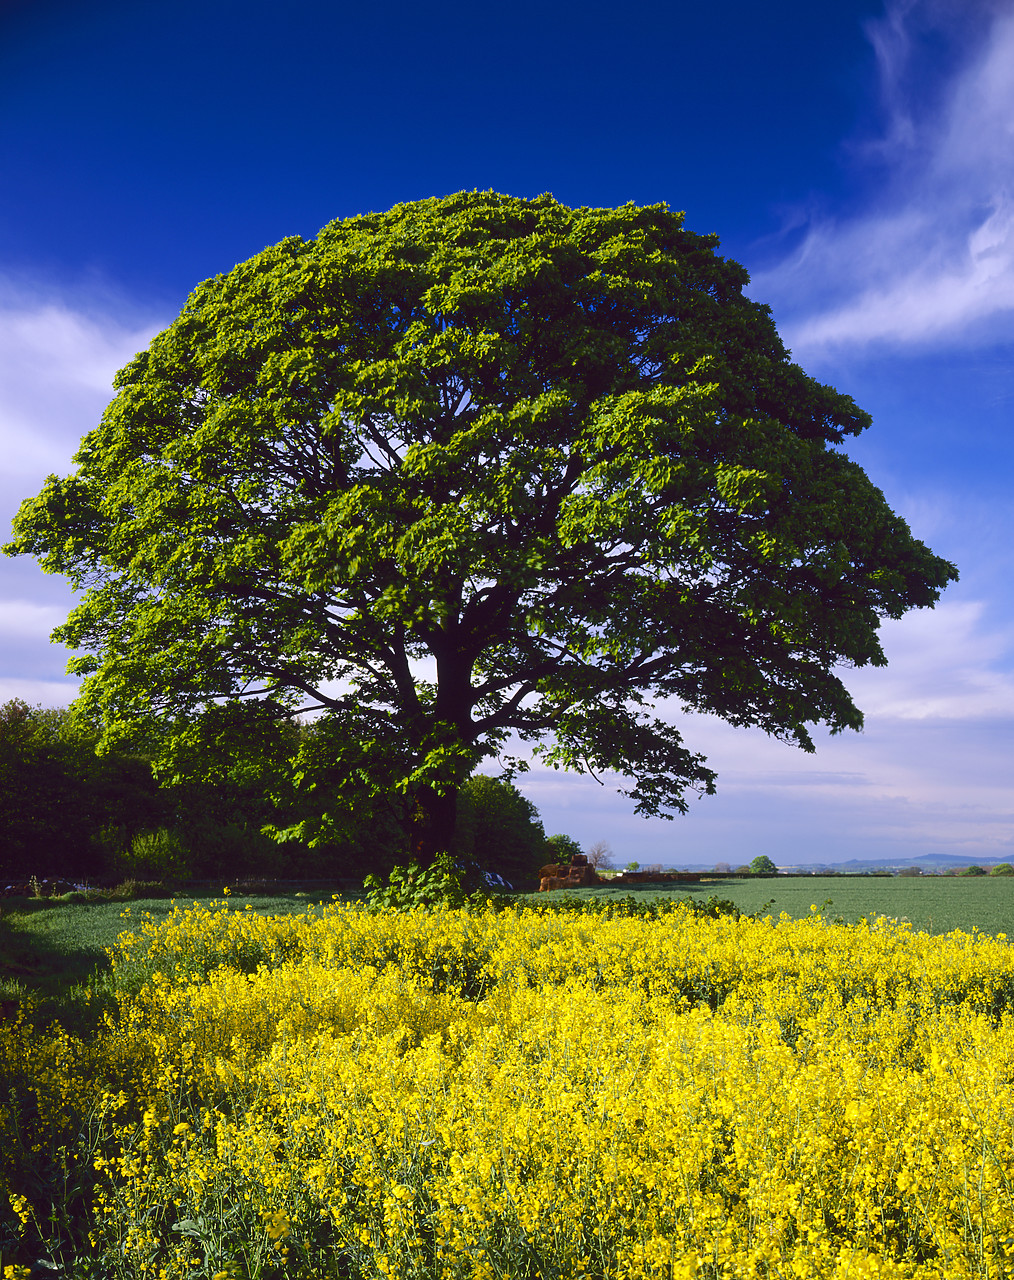 #970212-4 - Tree in Field of Rape, North Yorkshire, England